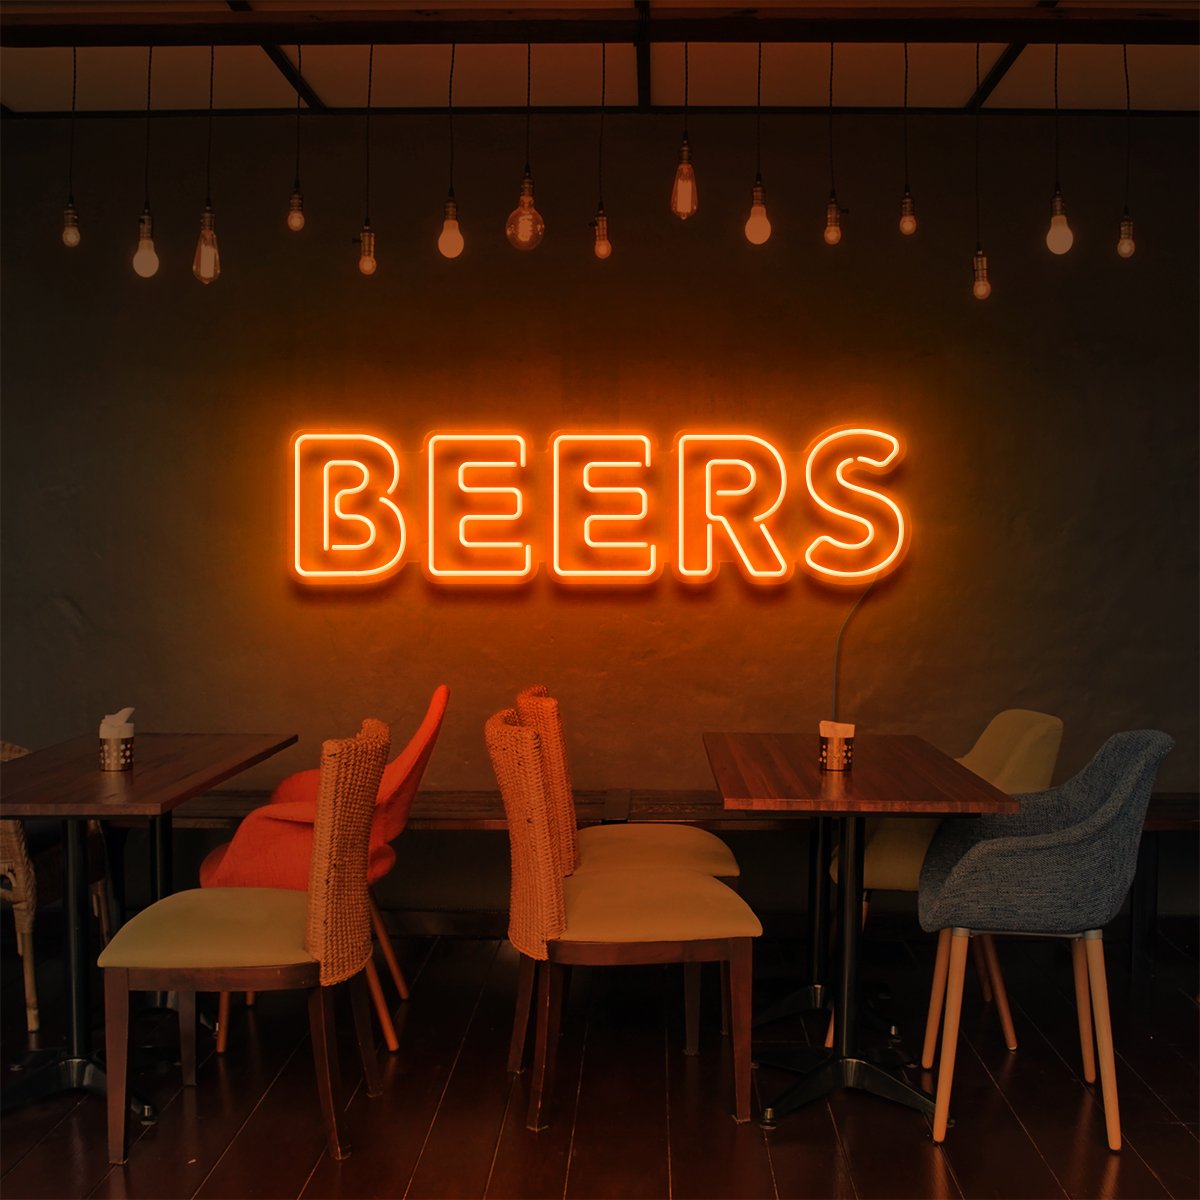 "Beers" Neon Sign for Bars & Restaurants 60cm (2ft) / Orange / LED Neon by Neon Icons